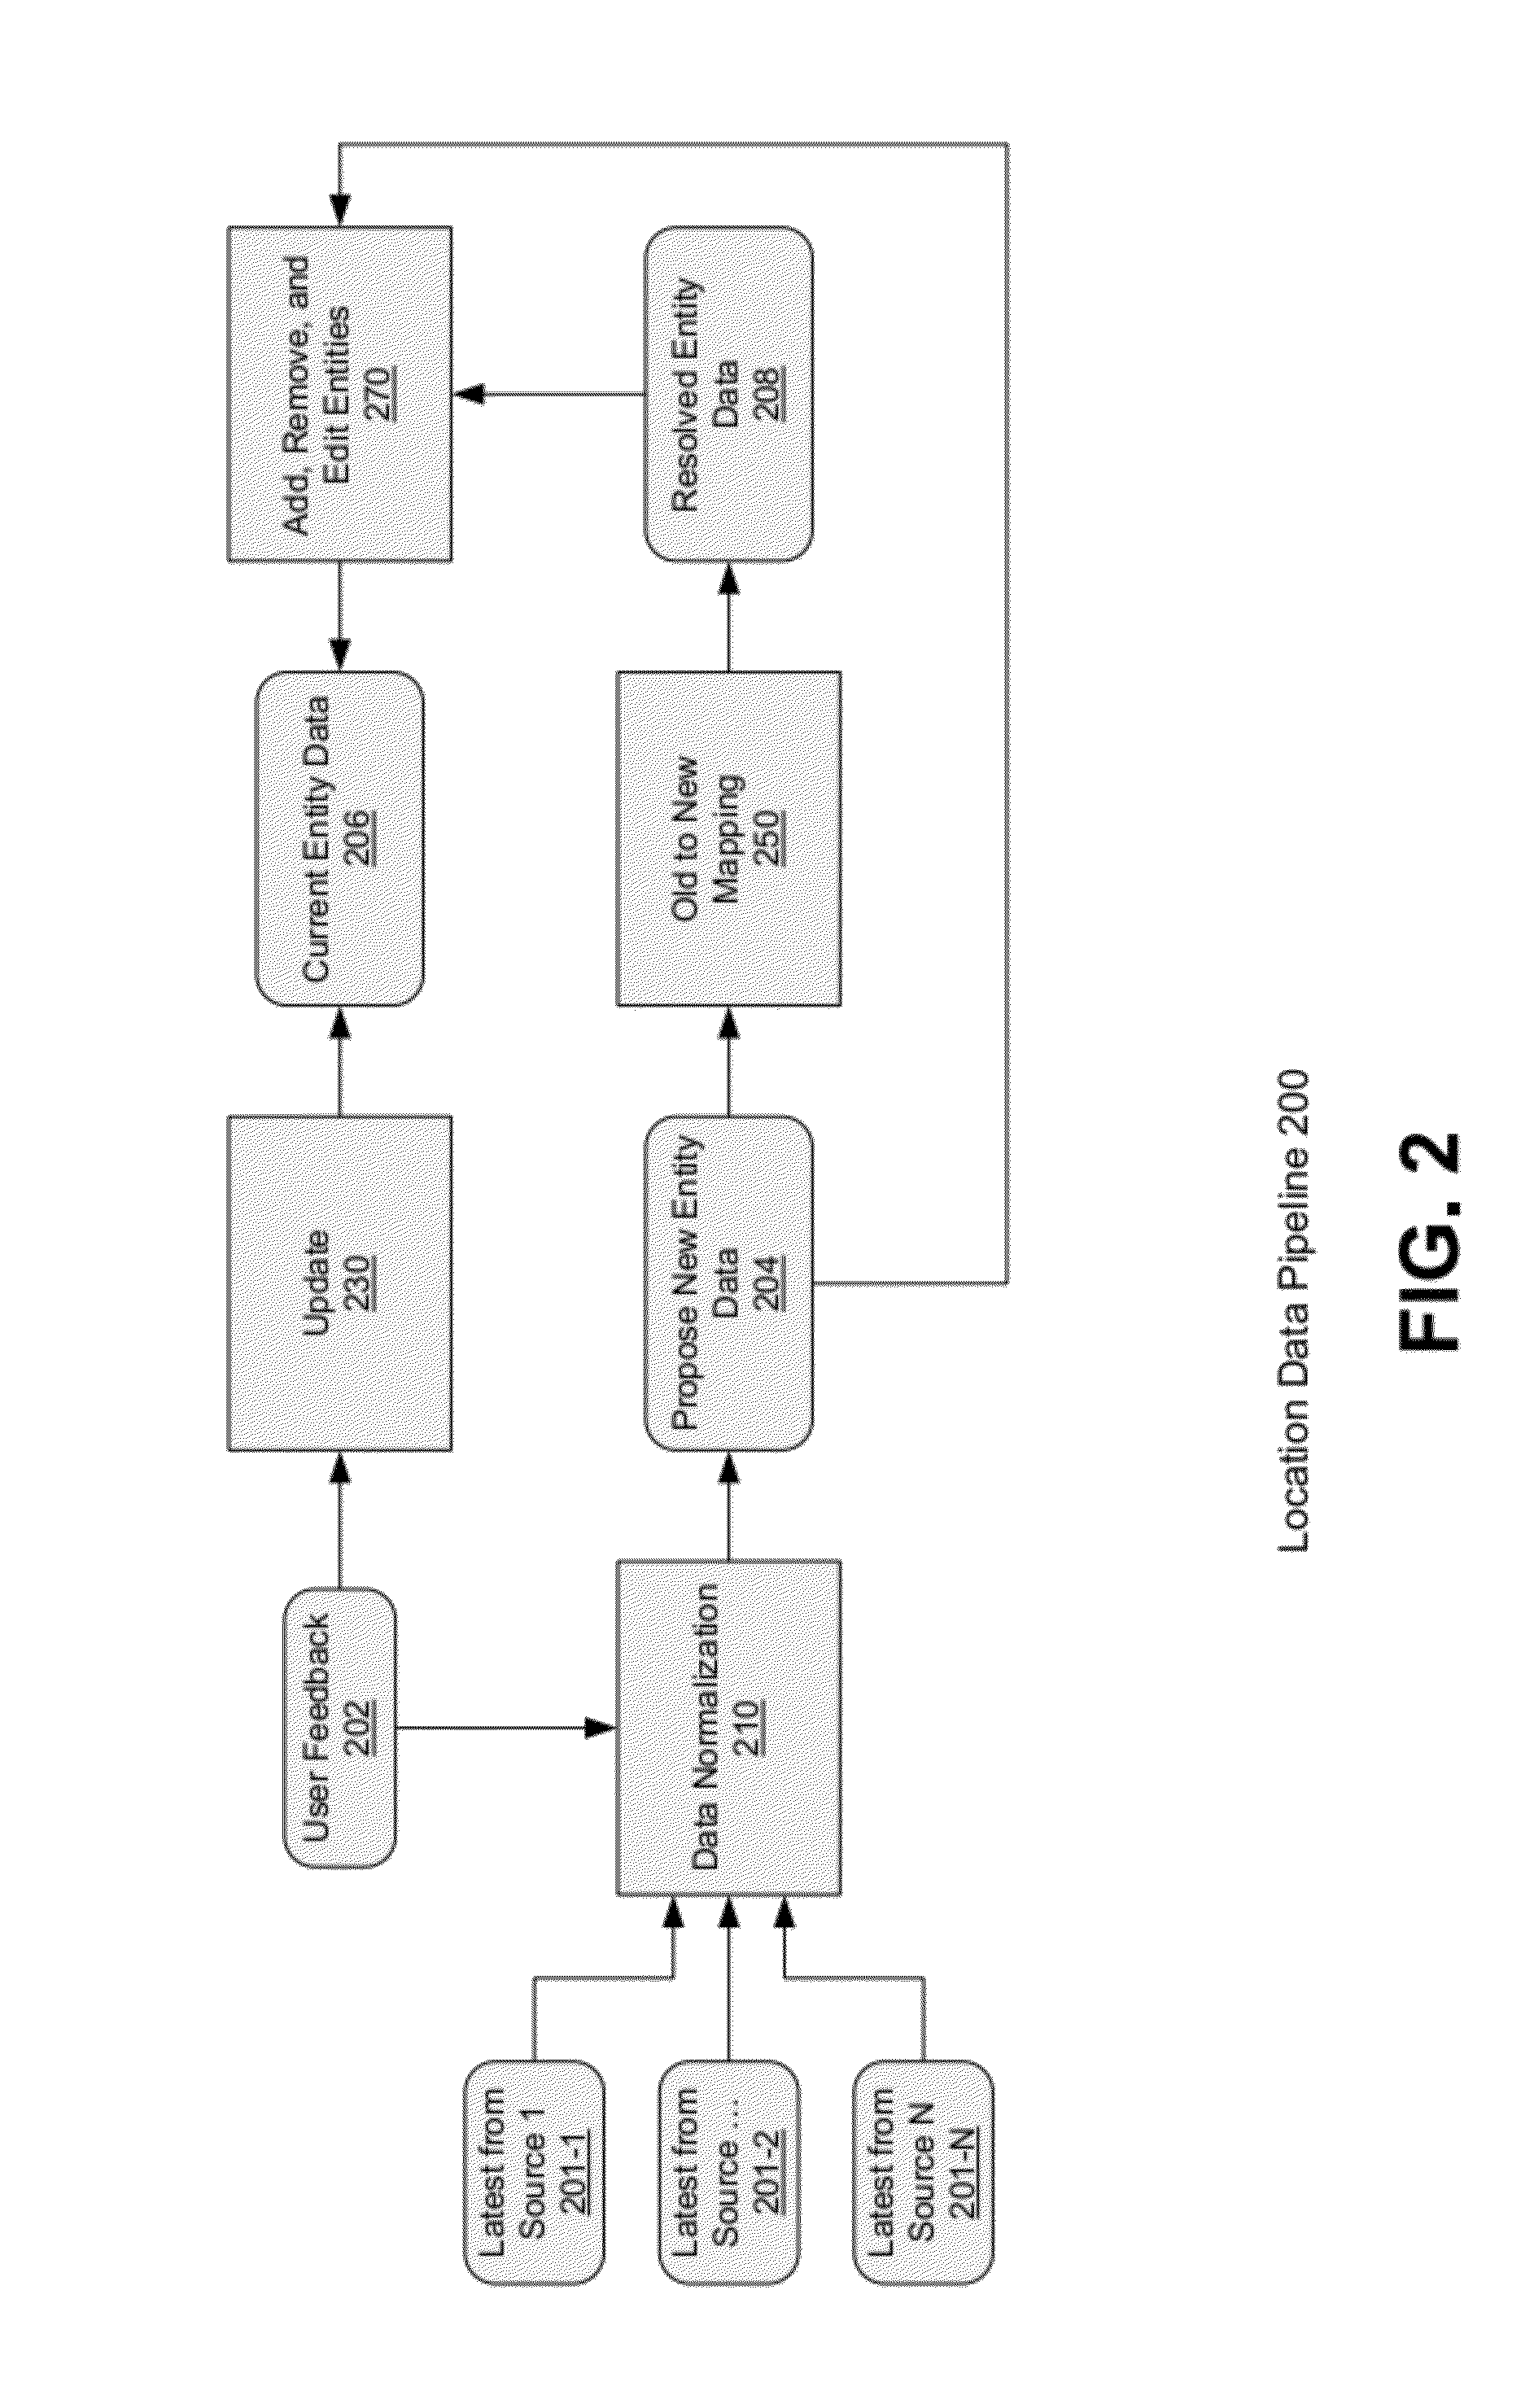 Computer system and method for analyzing data sets and providing personalized recommendations